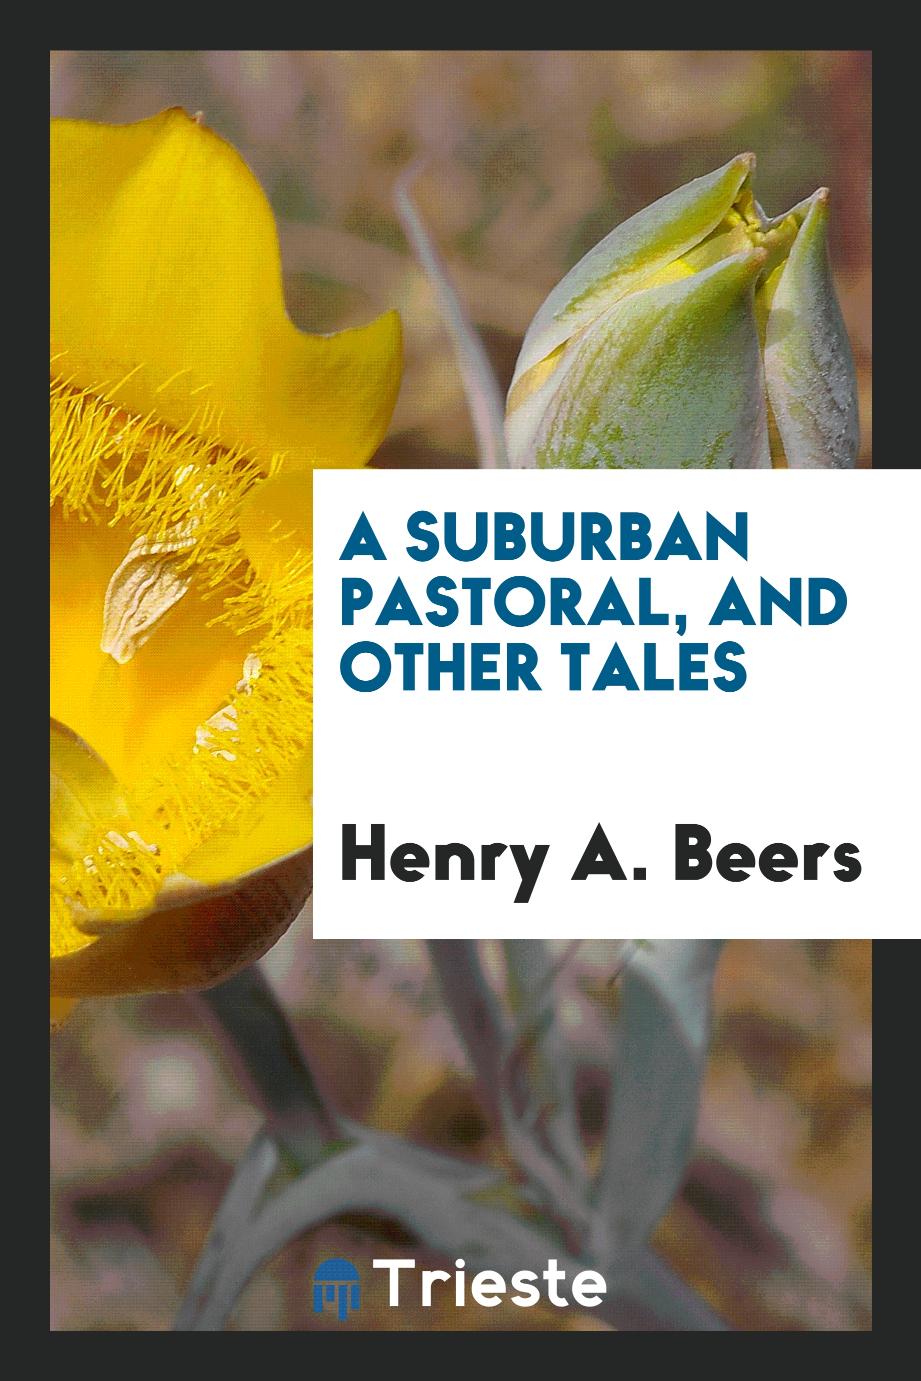 A suburban pastoral, and other tales